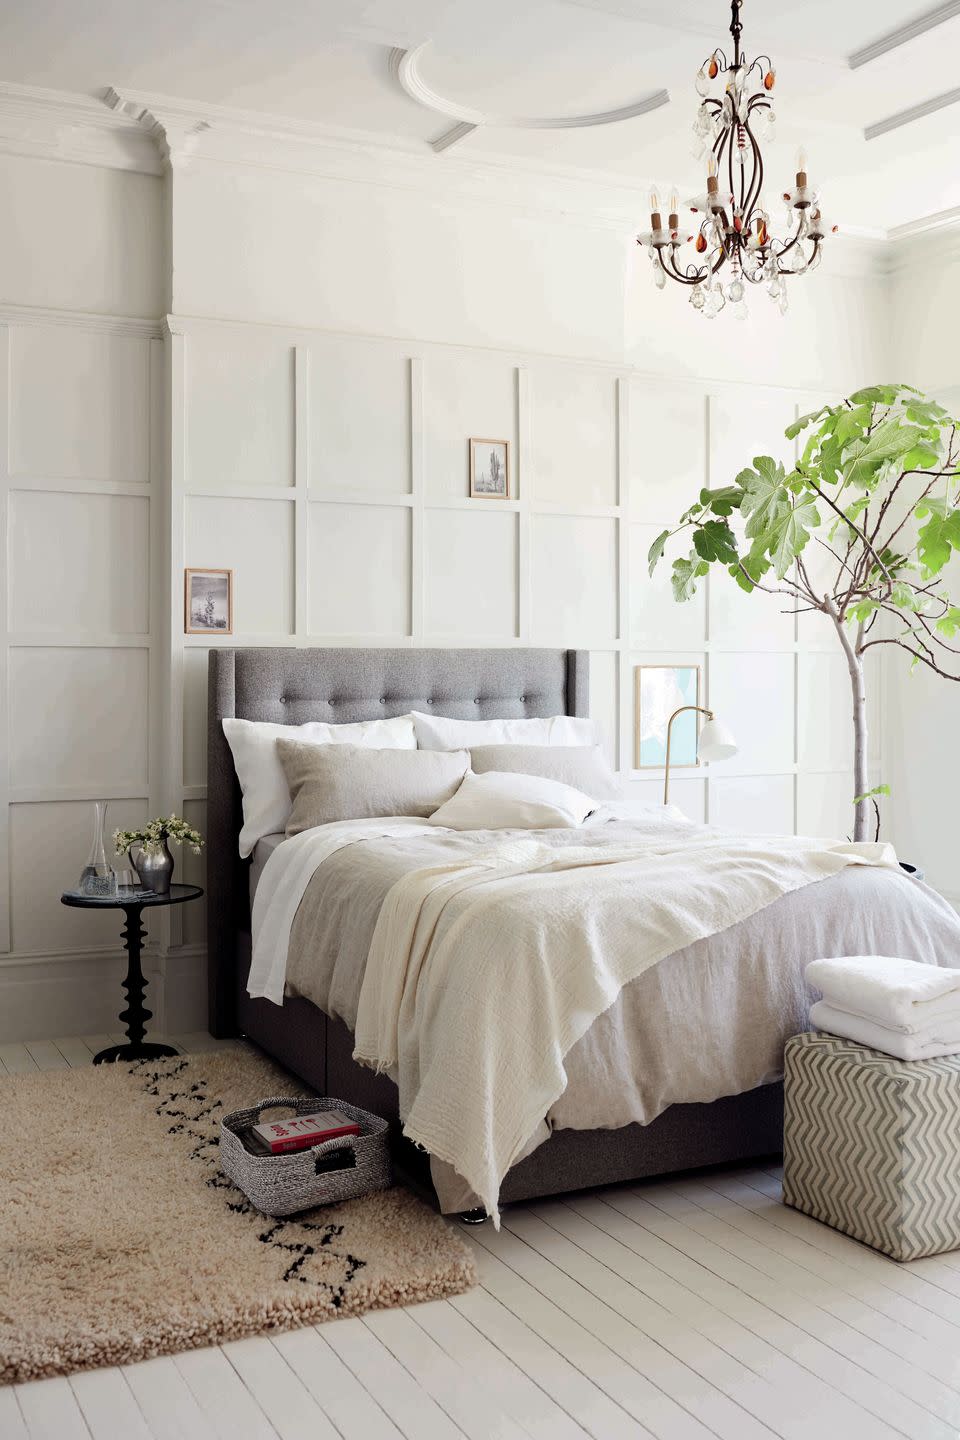 5) White bedroom ideas: modern meets traditional